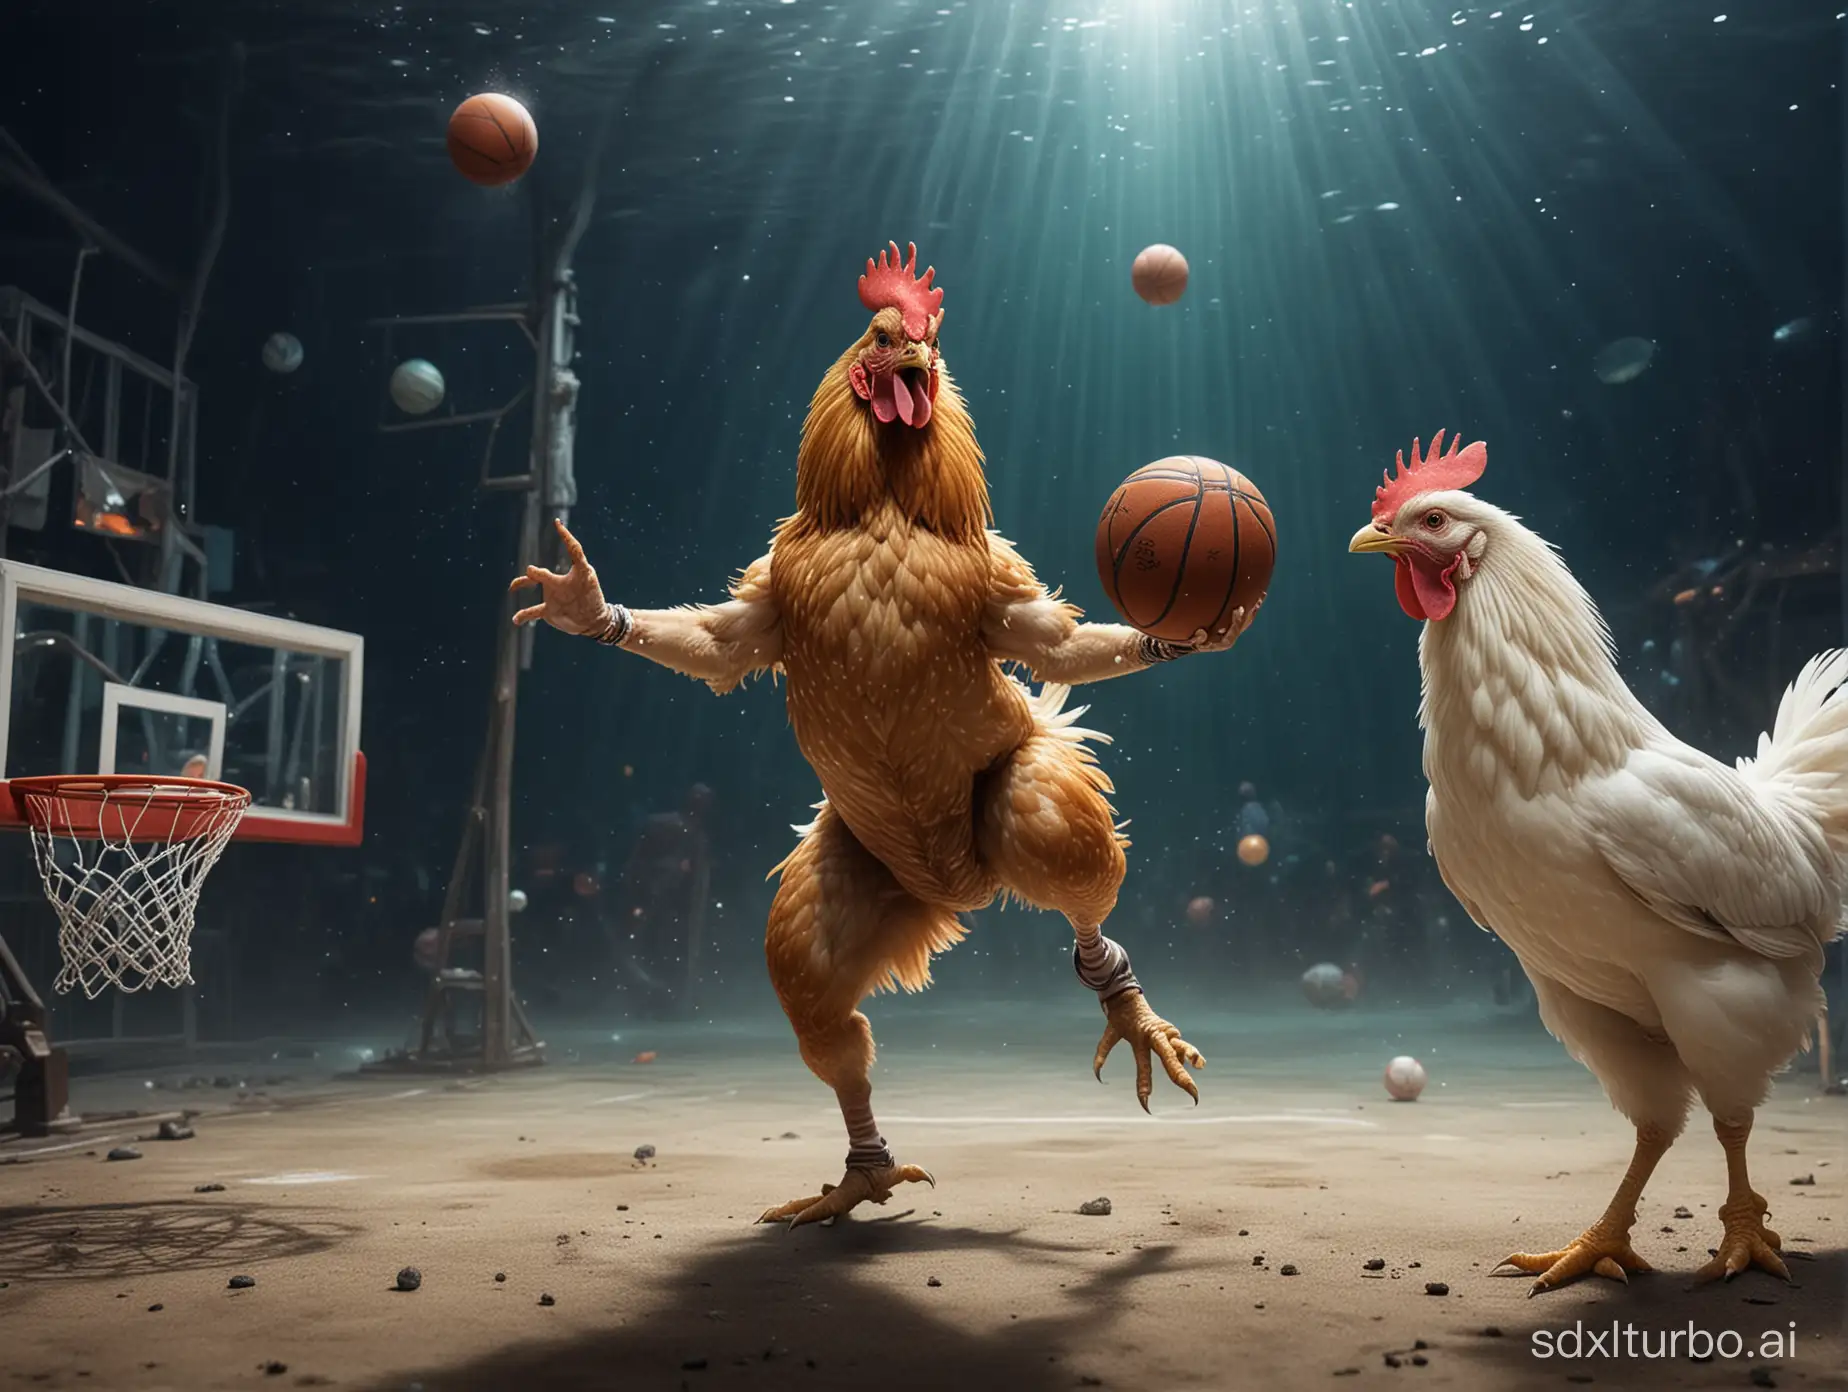 Unique-Basketball-Scene-Chicken-and-Cai-Xukun-Playing-in-Deep-Sea